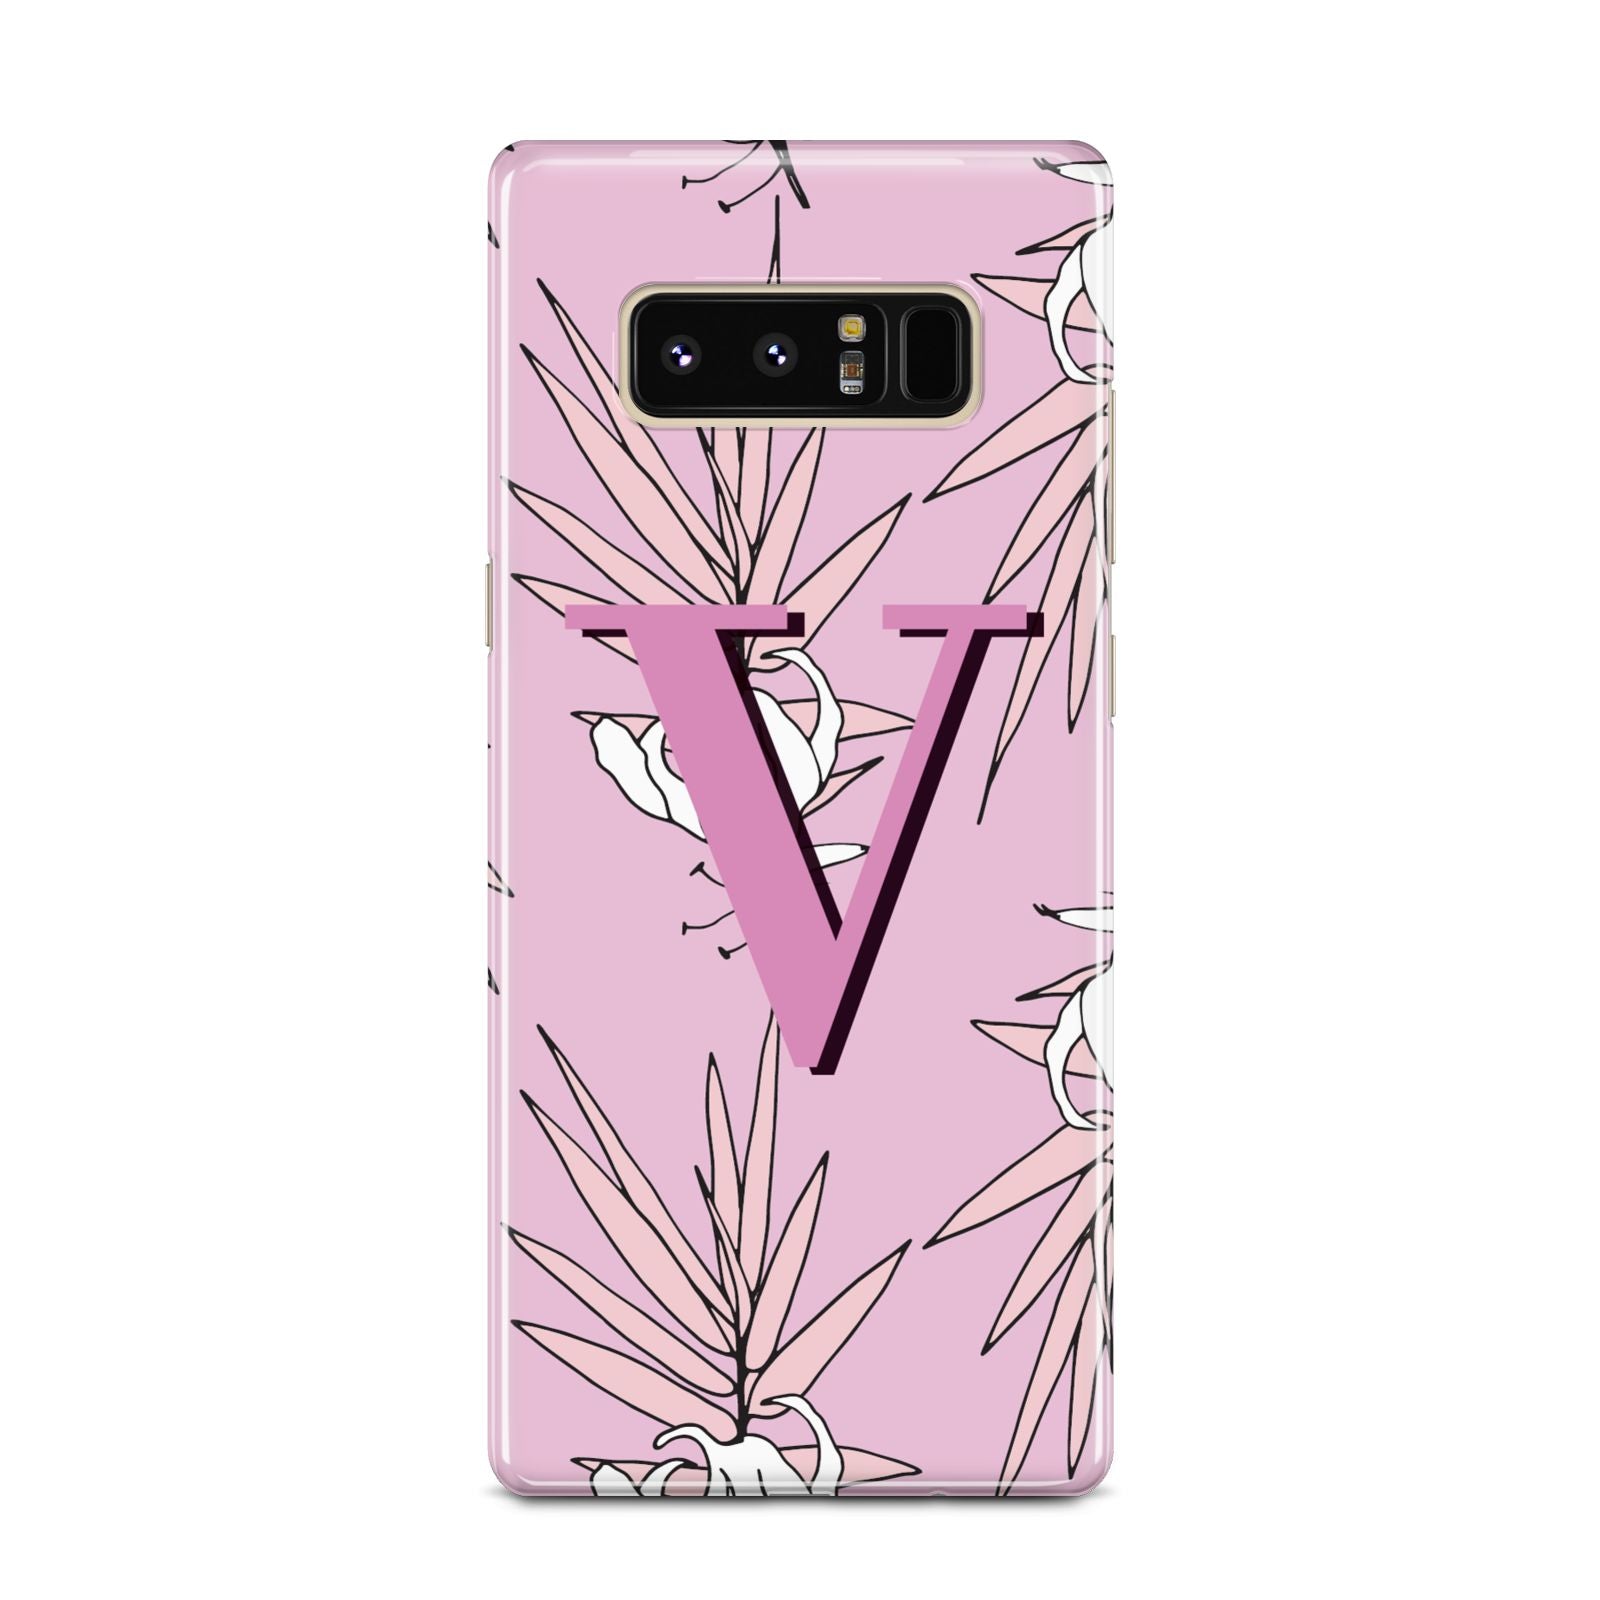 Personalised Pink and White Floral Monogram Samsung Galaxy Note 8 Case